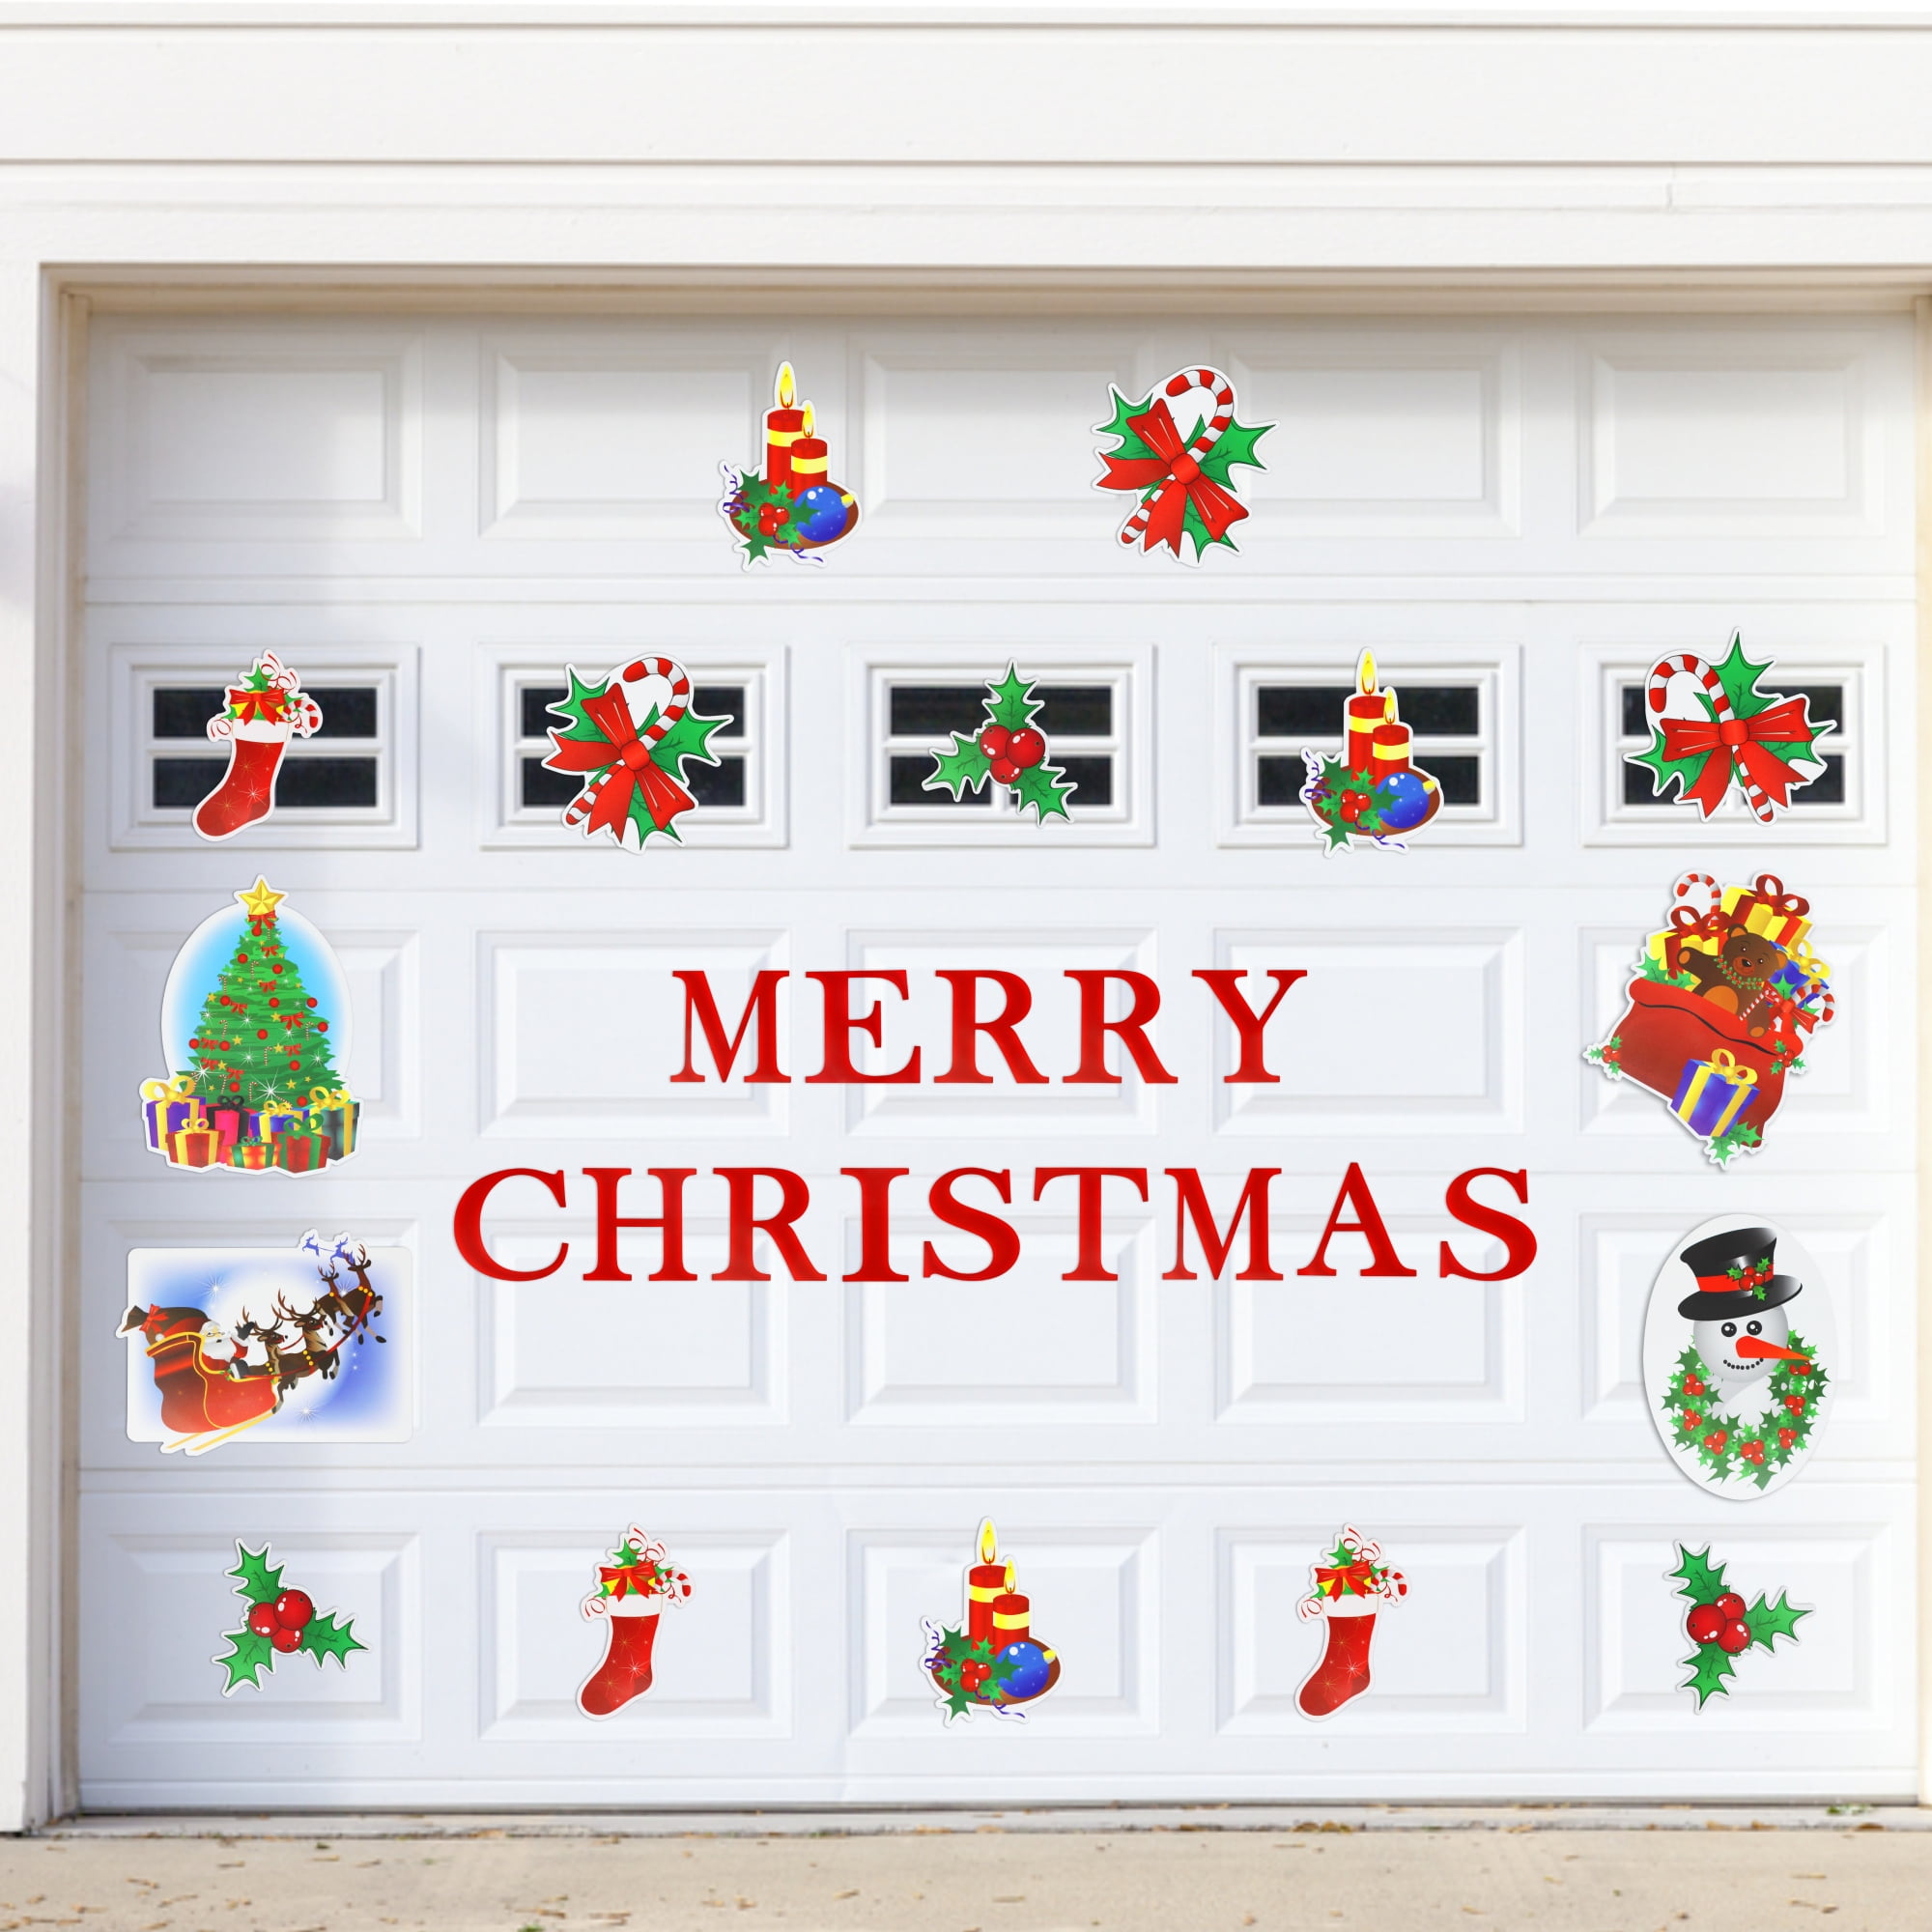 Merry Christmas Garage Door Magnets, 30Pcs All in One Garage Christmas ...